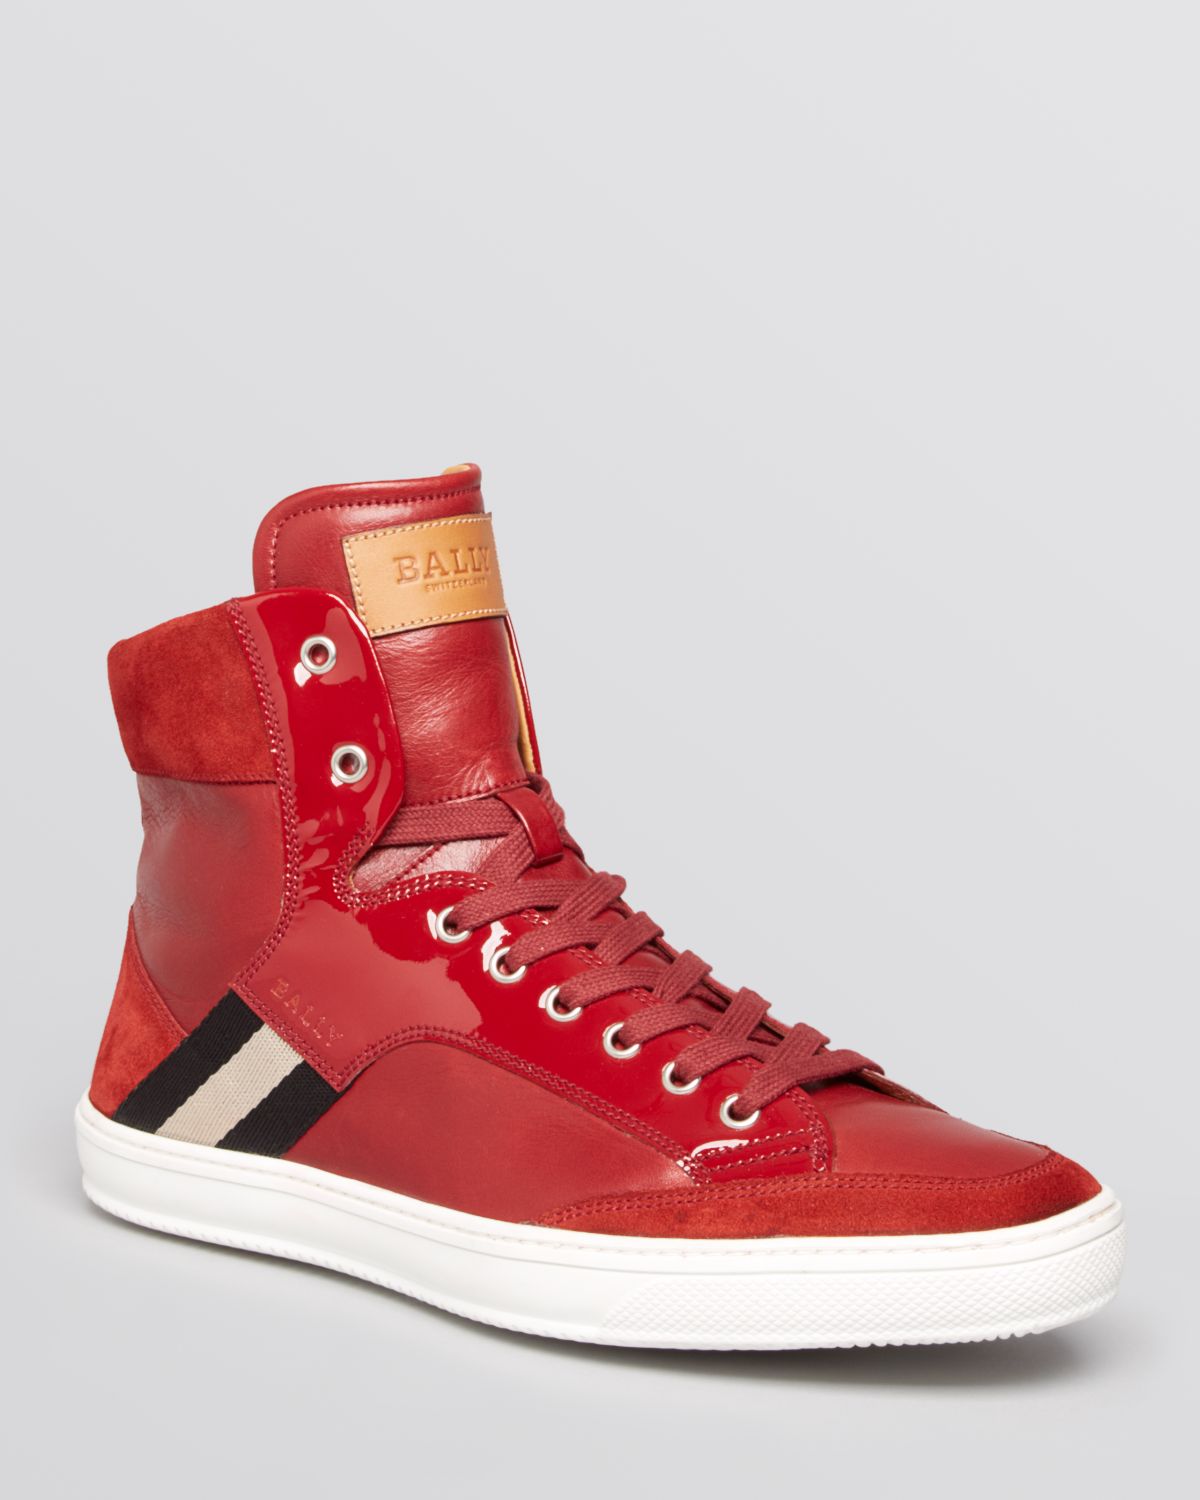 Bally Oldani High Top Sneakers in Red 